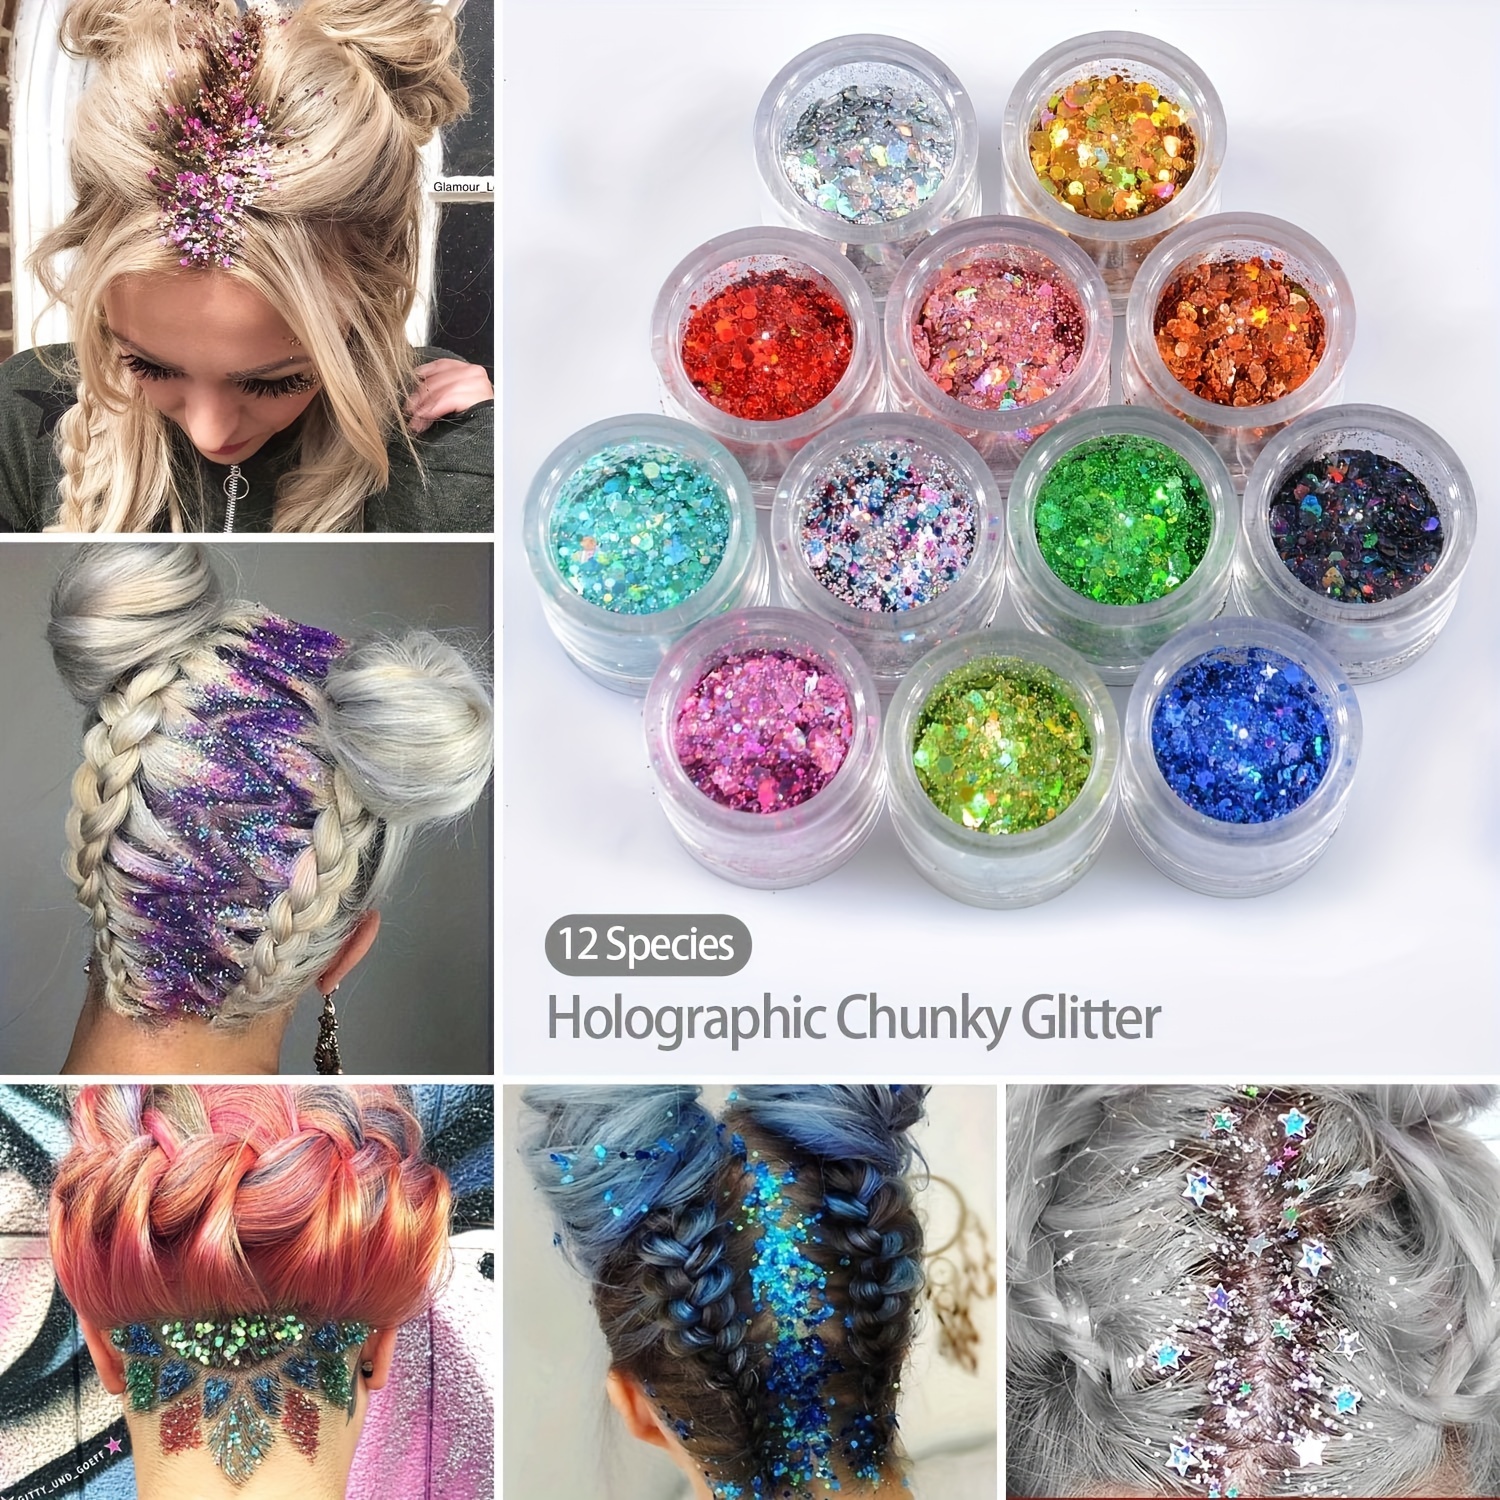 12 Colors of Holographic Chunky Glitter No Glue Attached, 12 Pots Total  120g Multi-Shaped for Body Hair Face Eyes Make-up, Nail Art and Bedazzling  in